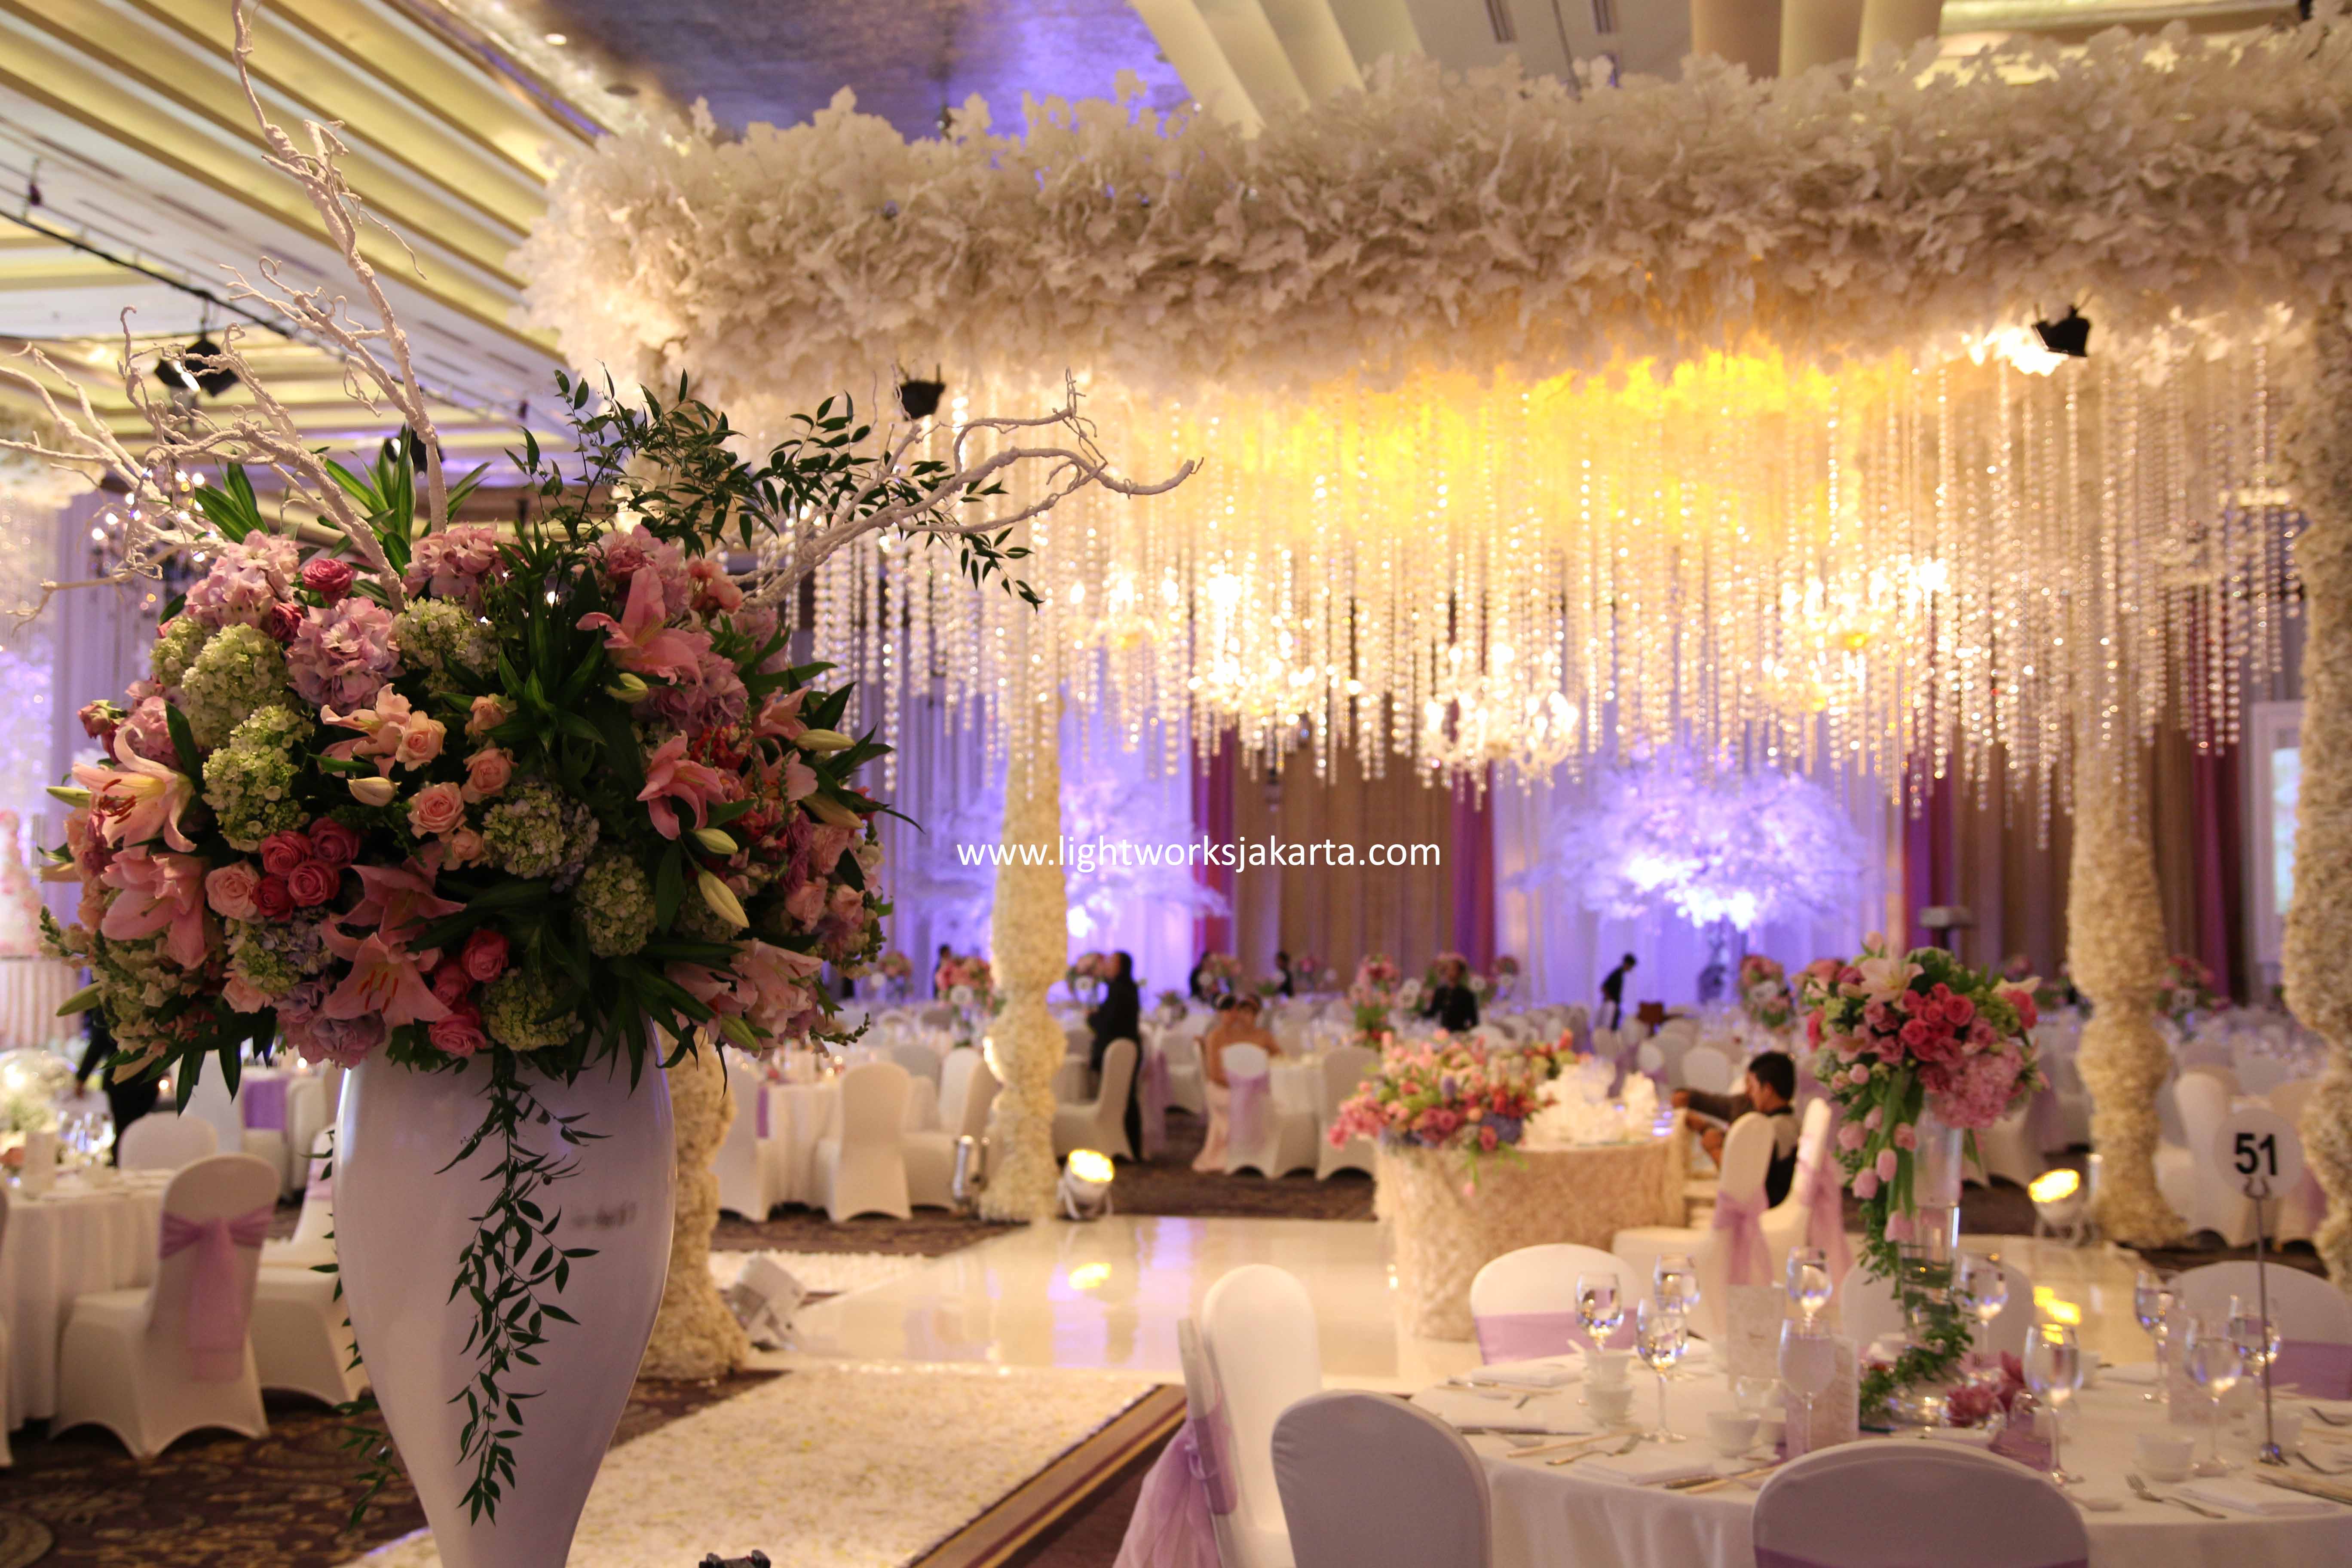 Alvin and Silvia's Wedding; Venue at Kempinski Hotel, Jakarta; Decoration by Lotus; Lighting by Lightworks